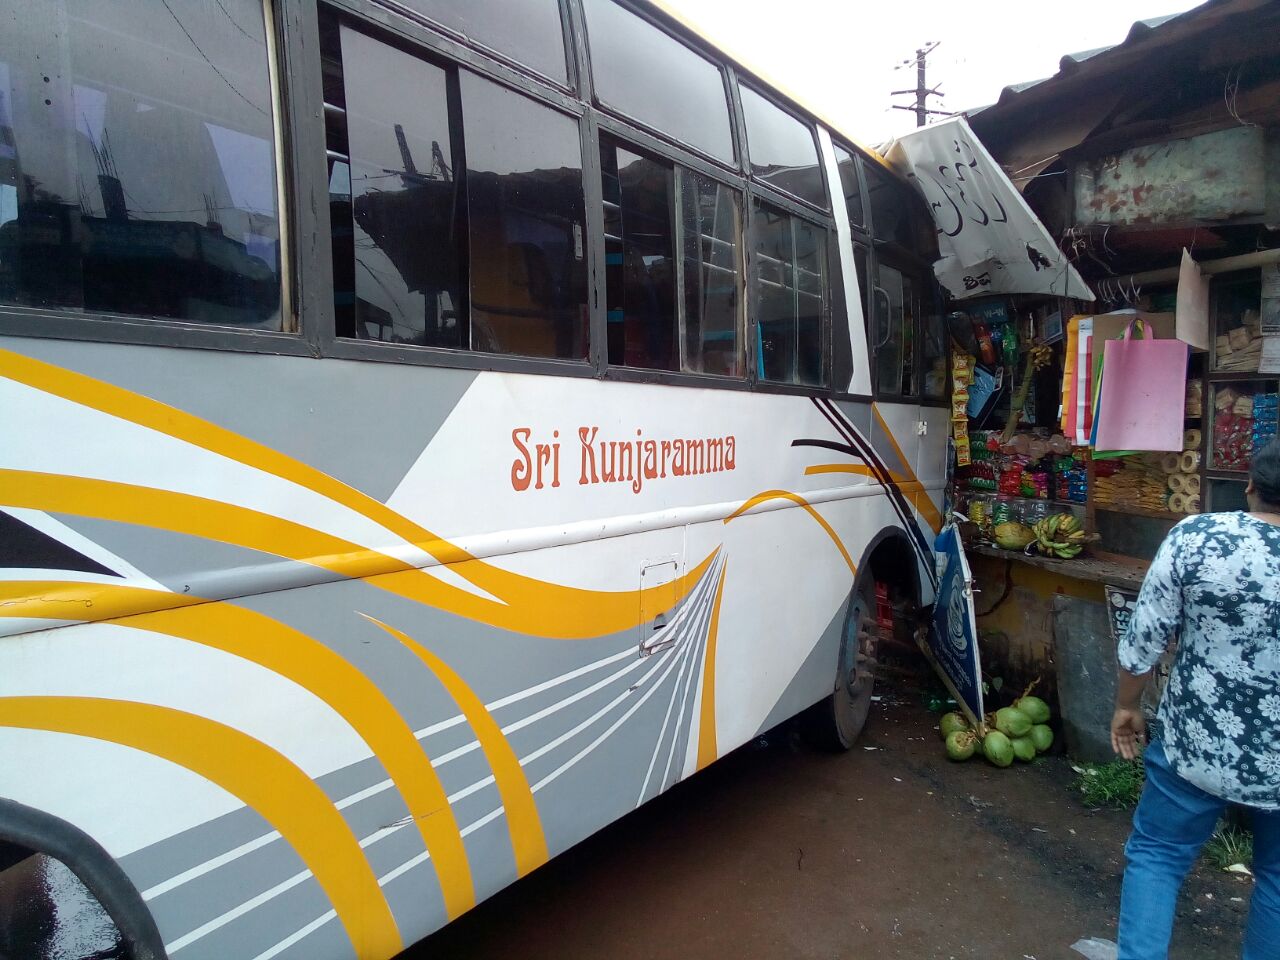 The driver lost control of the bus and stopped after hitting a shop at Shirva